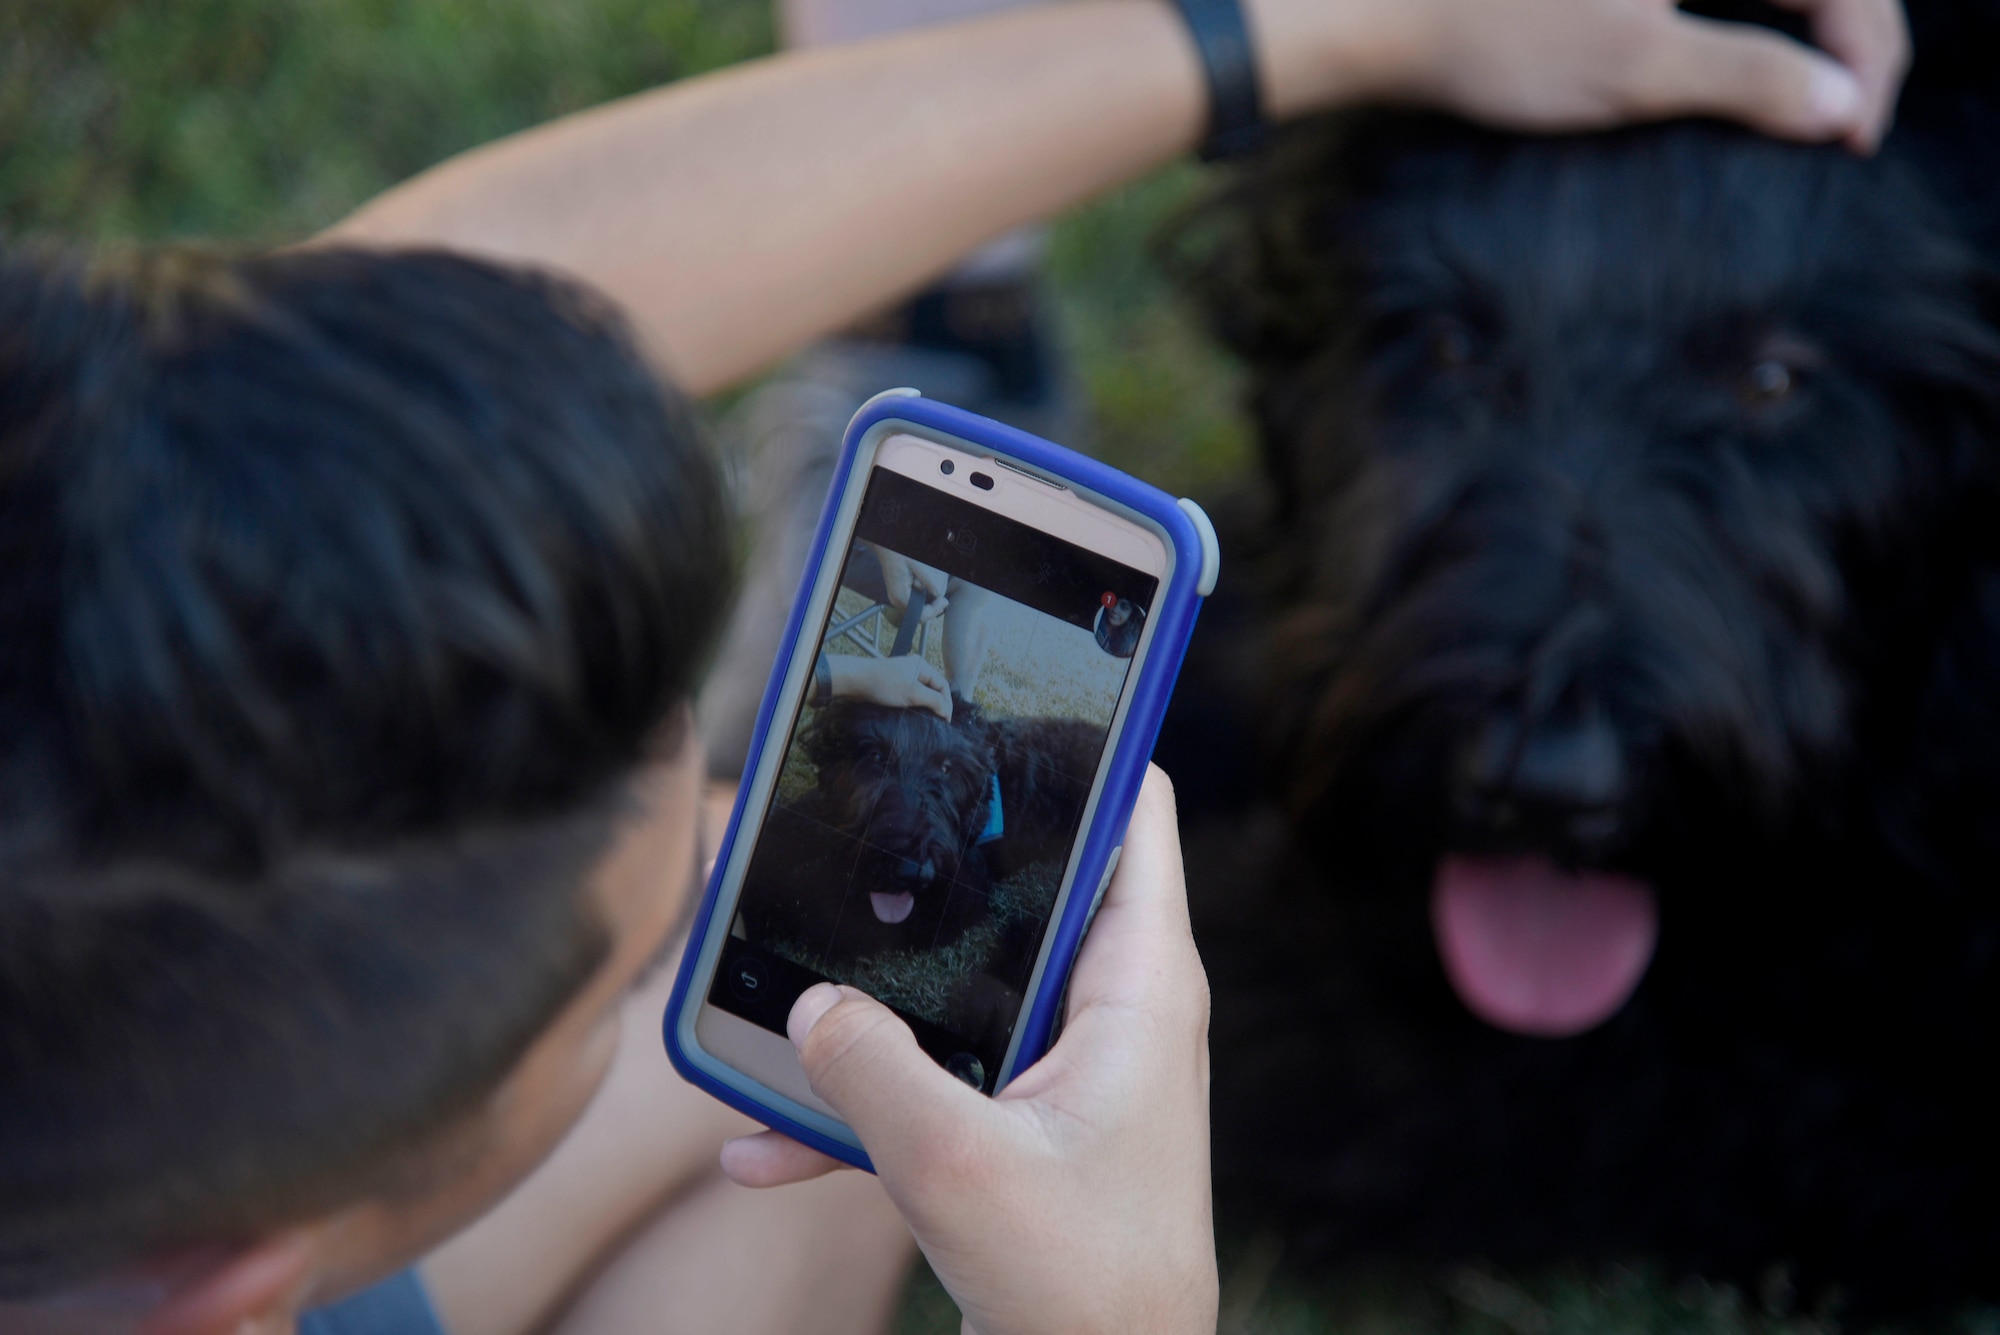 Airman Brandon Mena, 22nd Maintenance Squadron aerospace propulsion technician, takes a photo of a therapy dog July 25, 2017, at McConnell Air Force Base, Kan. Animals can provide people with feelings of relaxation and happiness, and therapy dogs visit places where people may need that comfort. (U.S. Air Force photo/Airman 1st Class Erin McClellan)